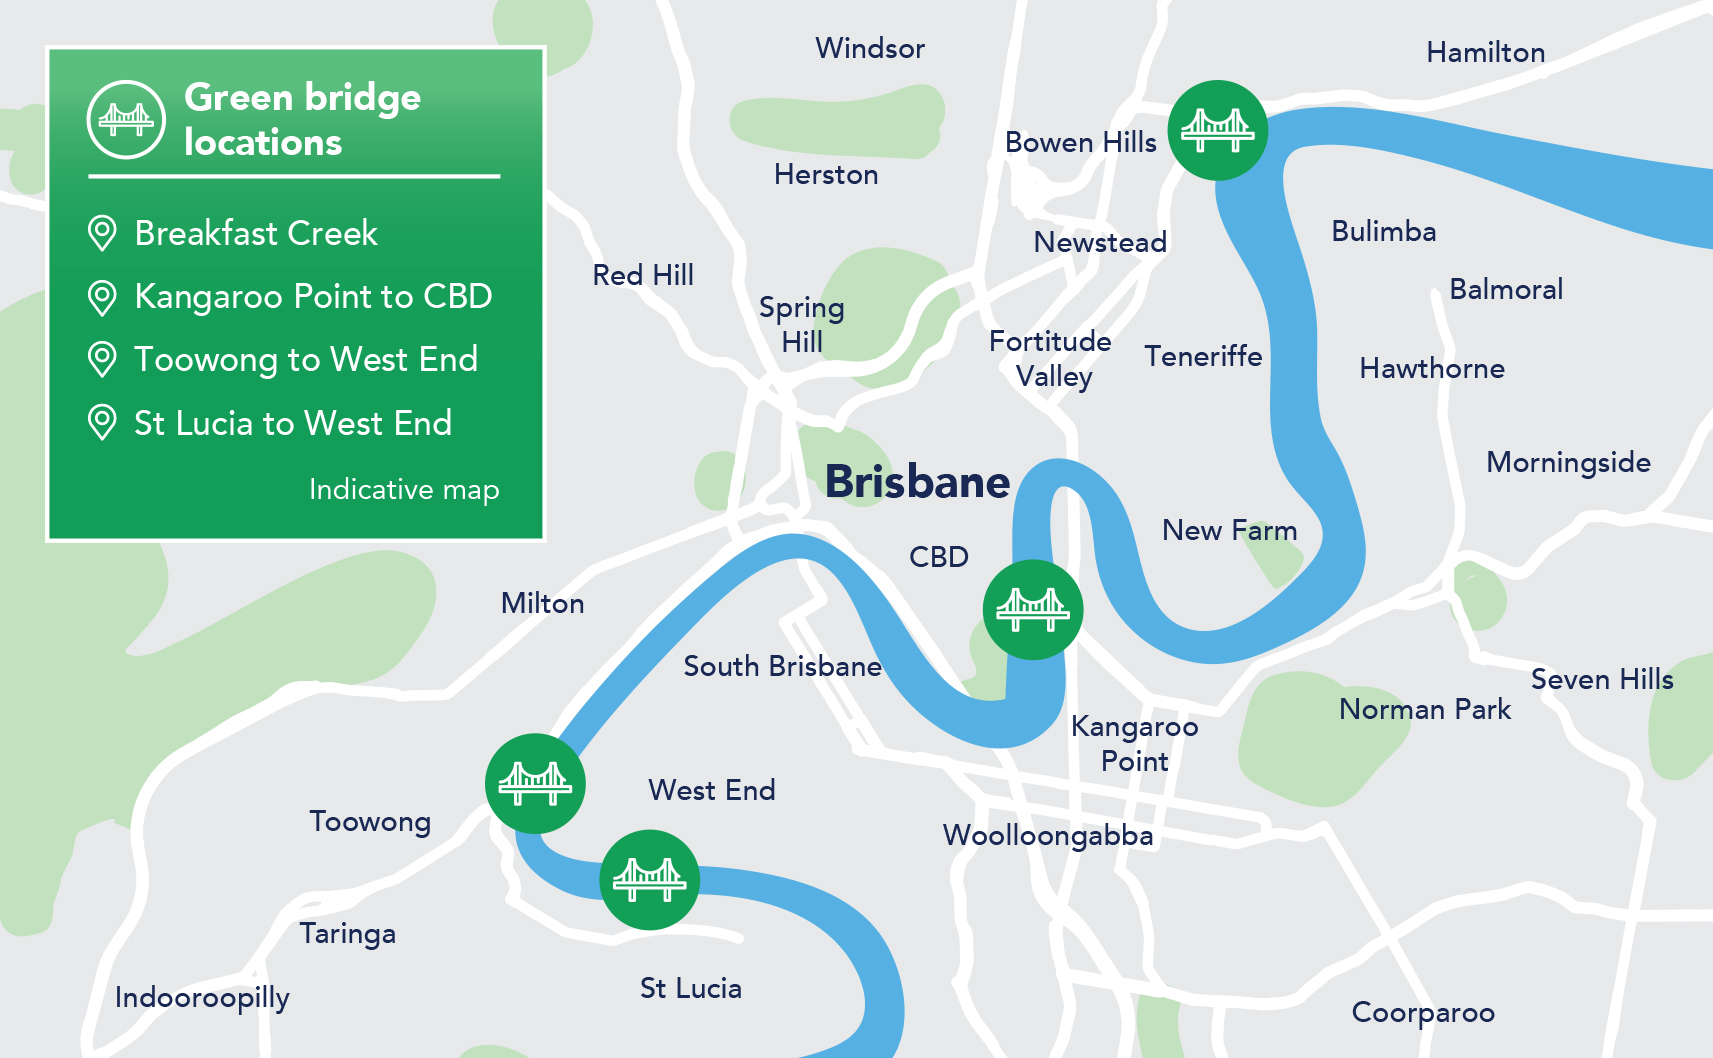 Map of green bridge locations including Breakfast Creek, Kangaroo Point to CBD, Toowong to West End and St Lucia to West End. The map is indicative and shows the locations along the Brisbane River. It also shows surrounding suburbs along the Brisbane River.